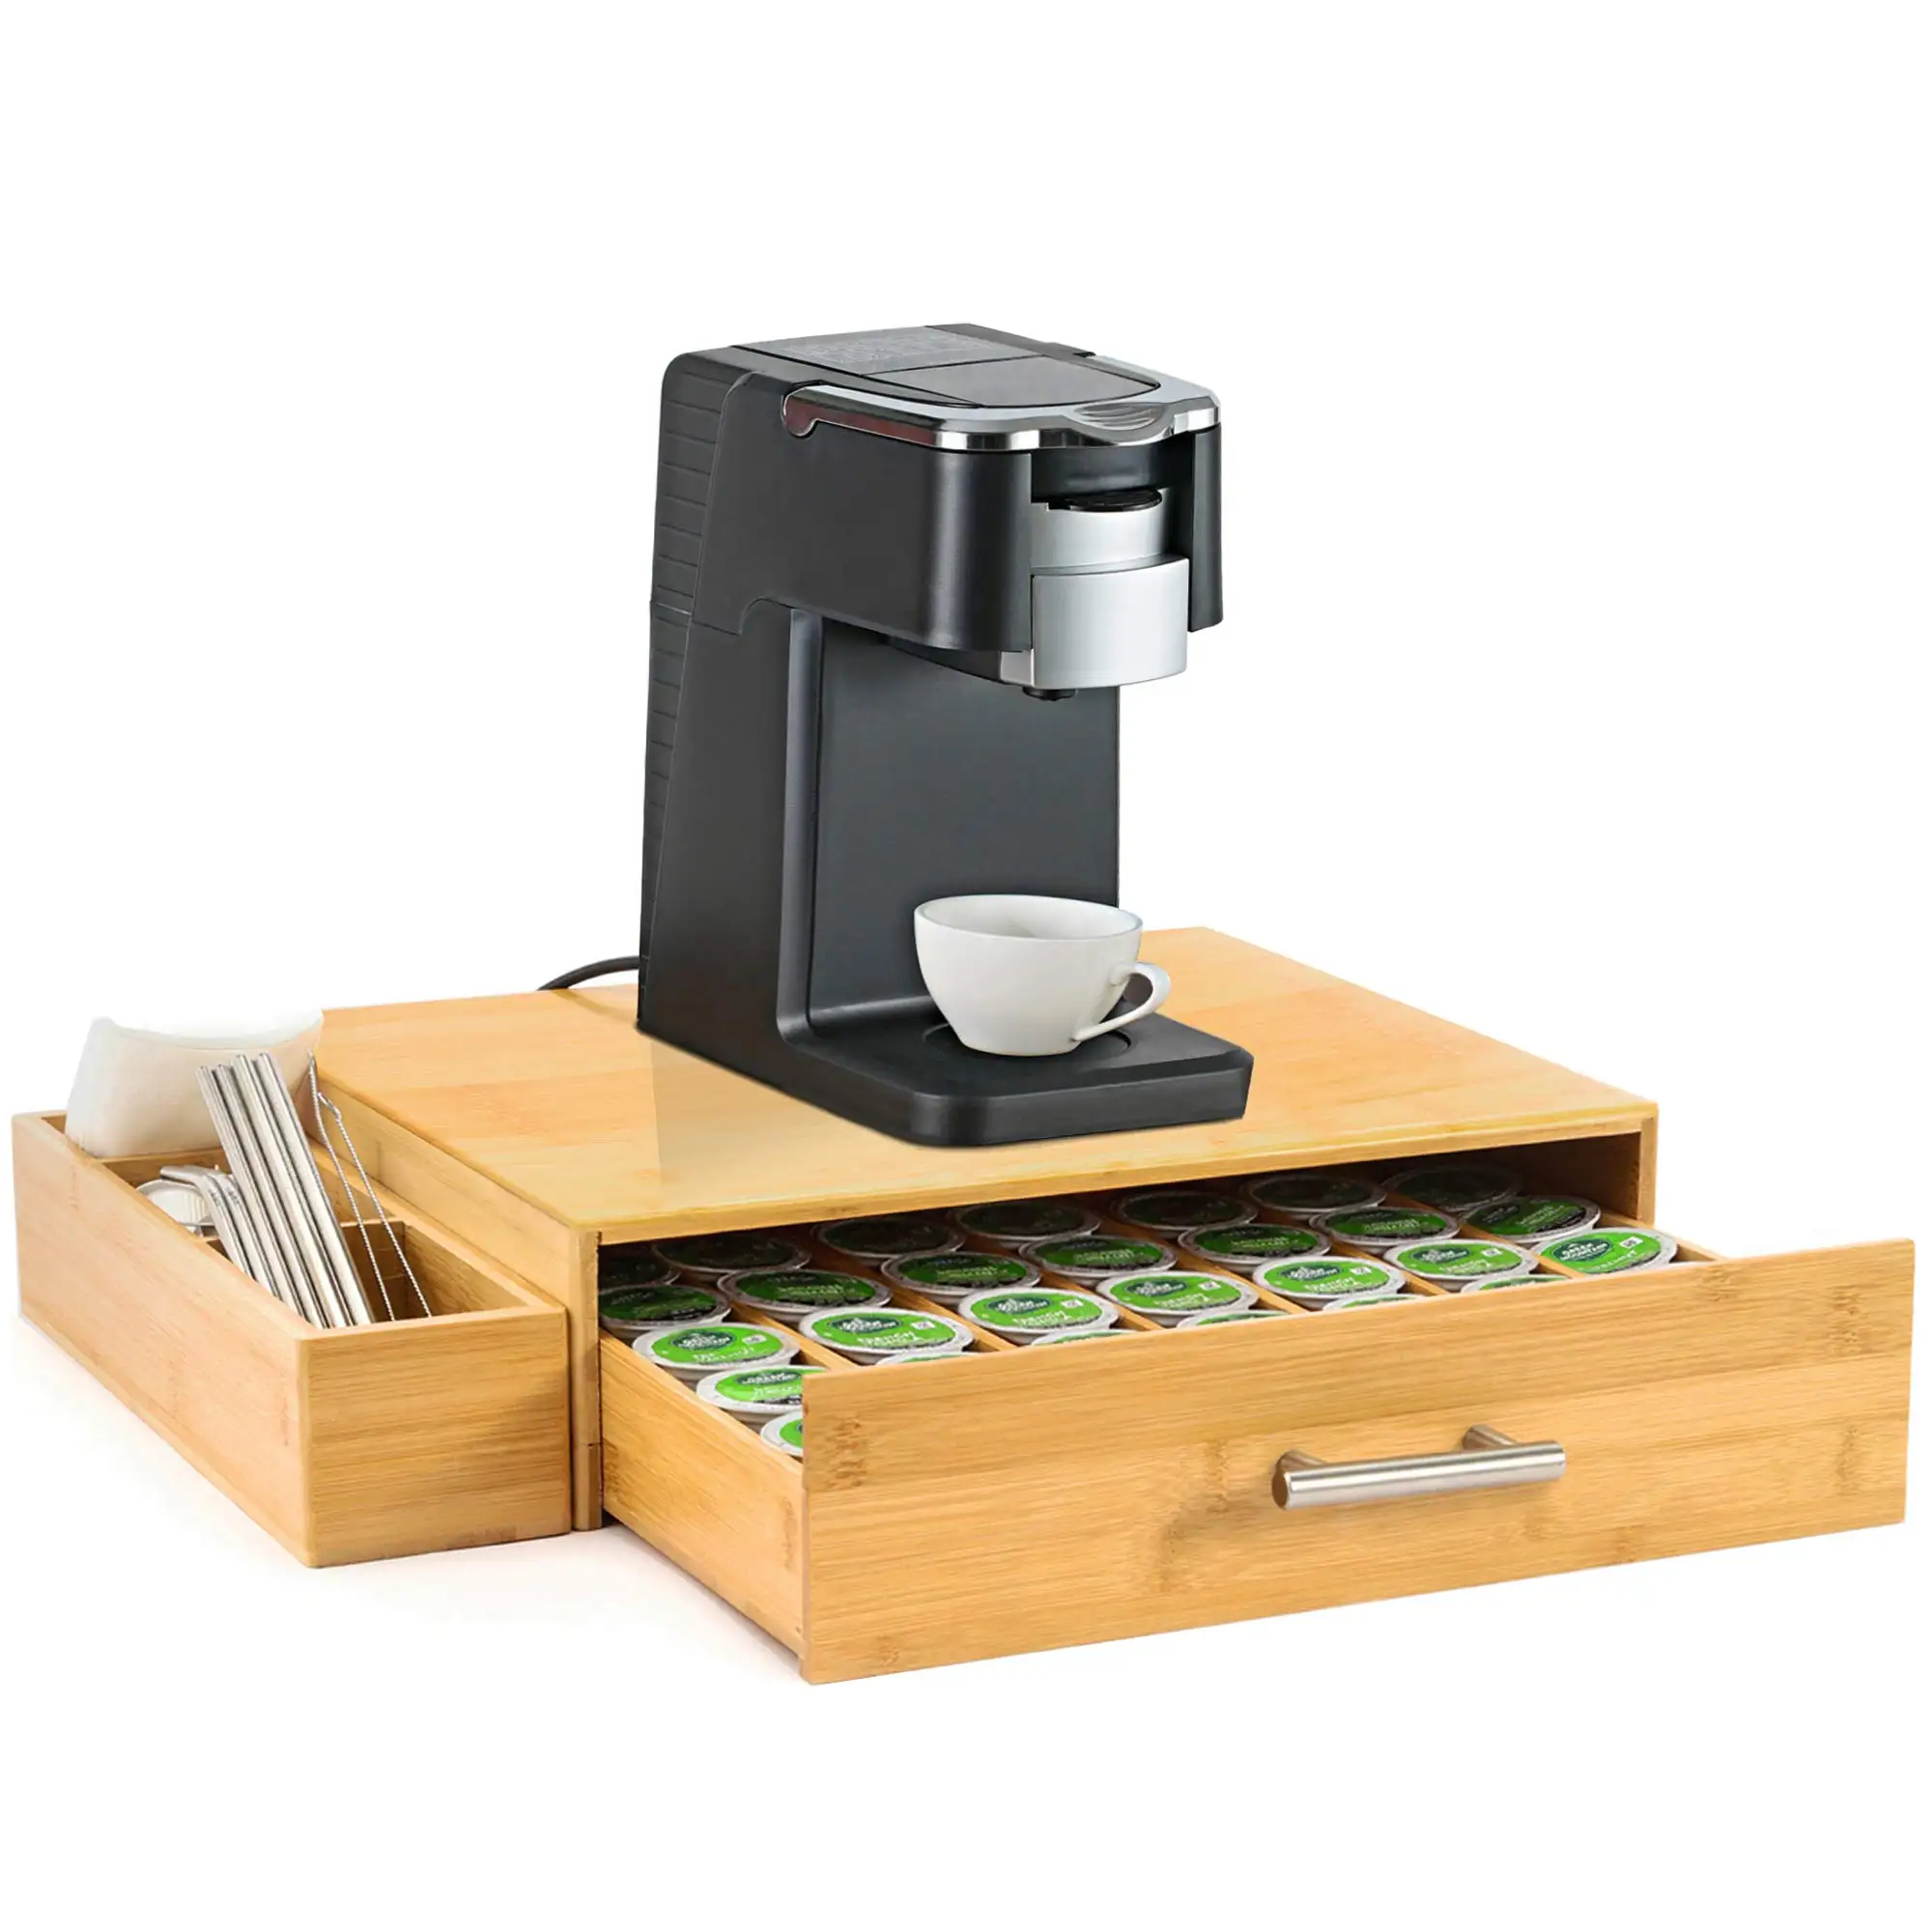 Bamboo Coffee Pod Holder Coffee Capsul Storage Organizer with Drawer and Side Storage Box for K Cup Pods coffee holder